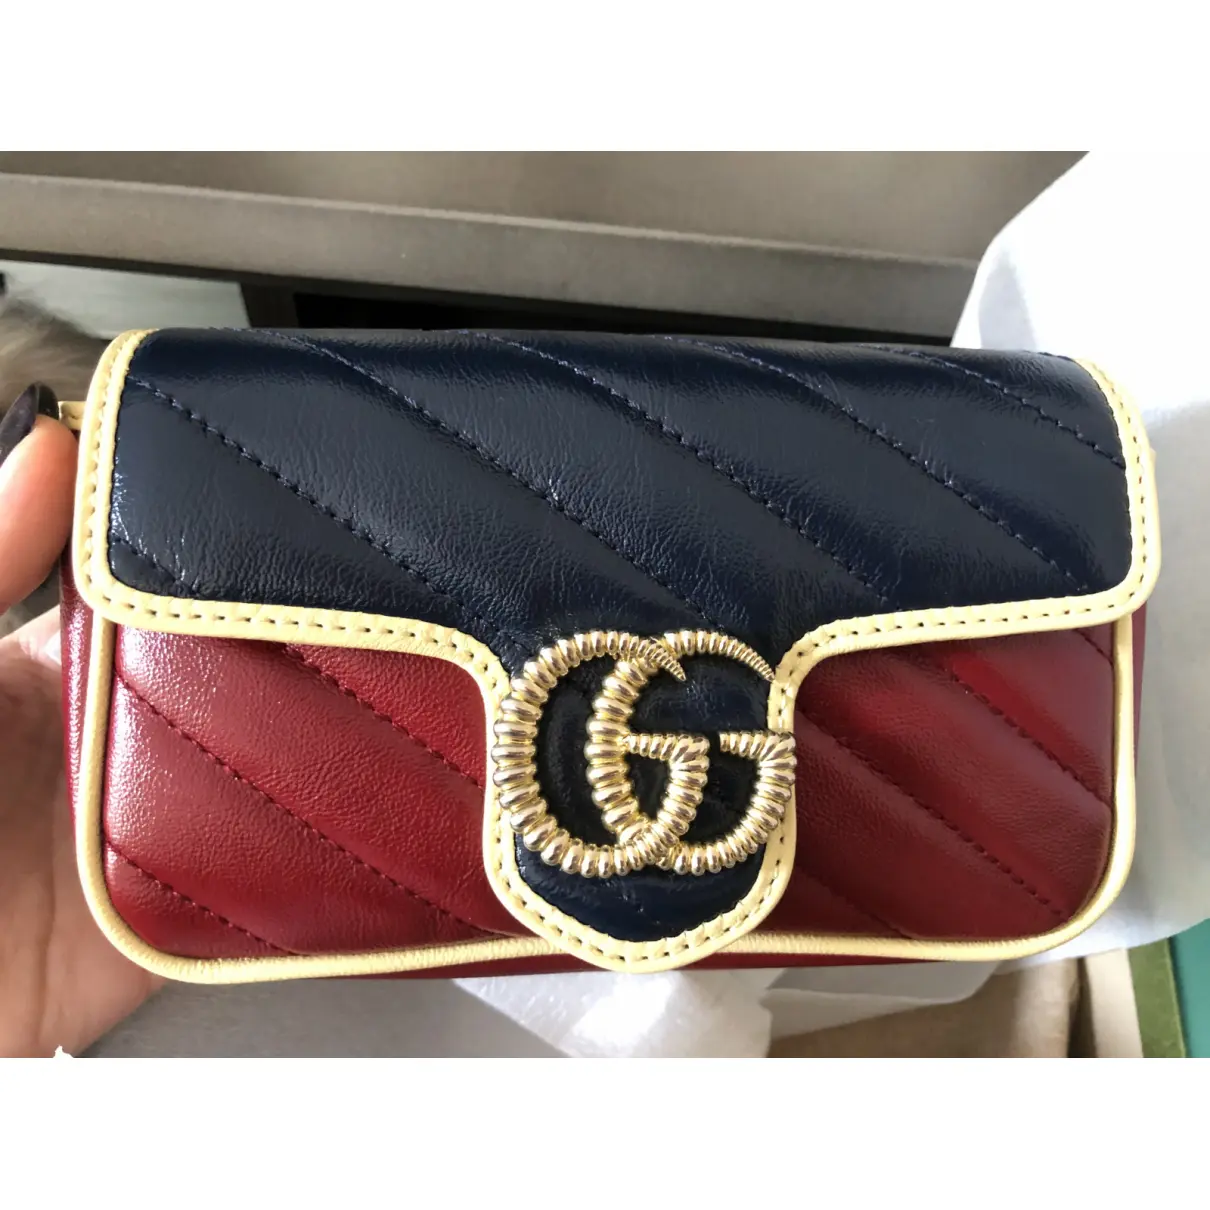 GG Marmont Chain Flap leather crossbody bag Gucci